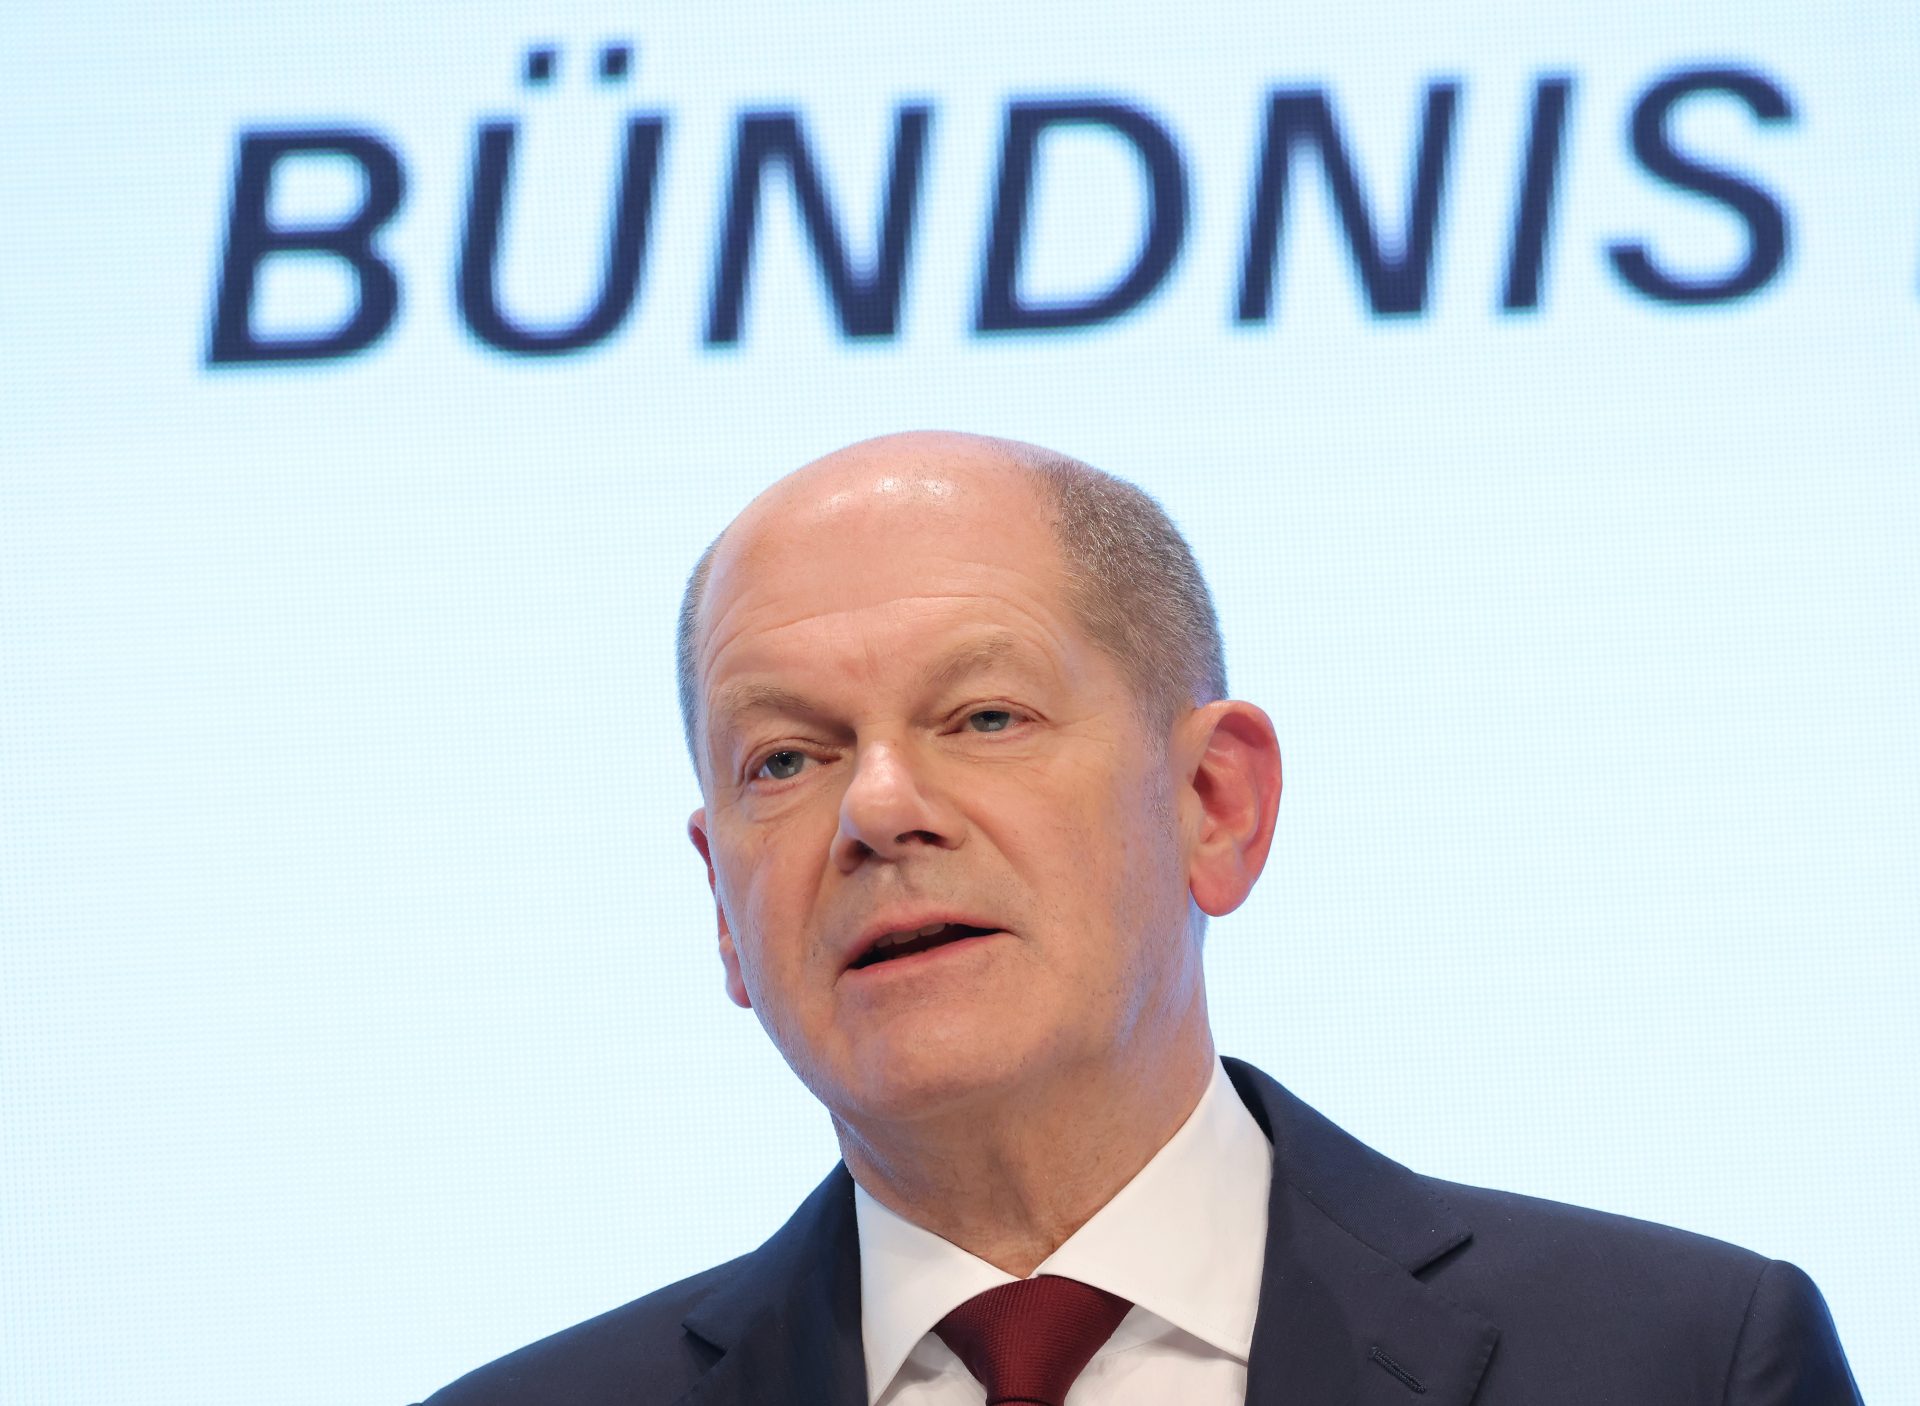 Germany's incoming chancellor Olaf Scholz.